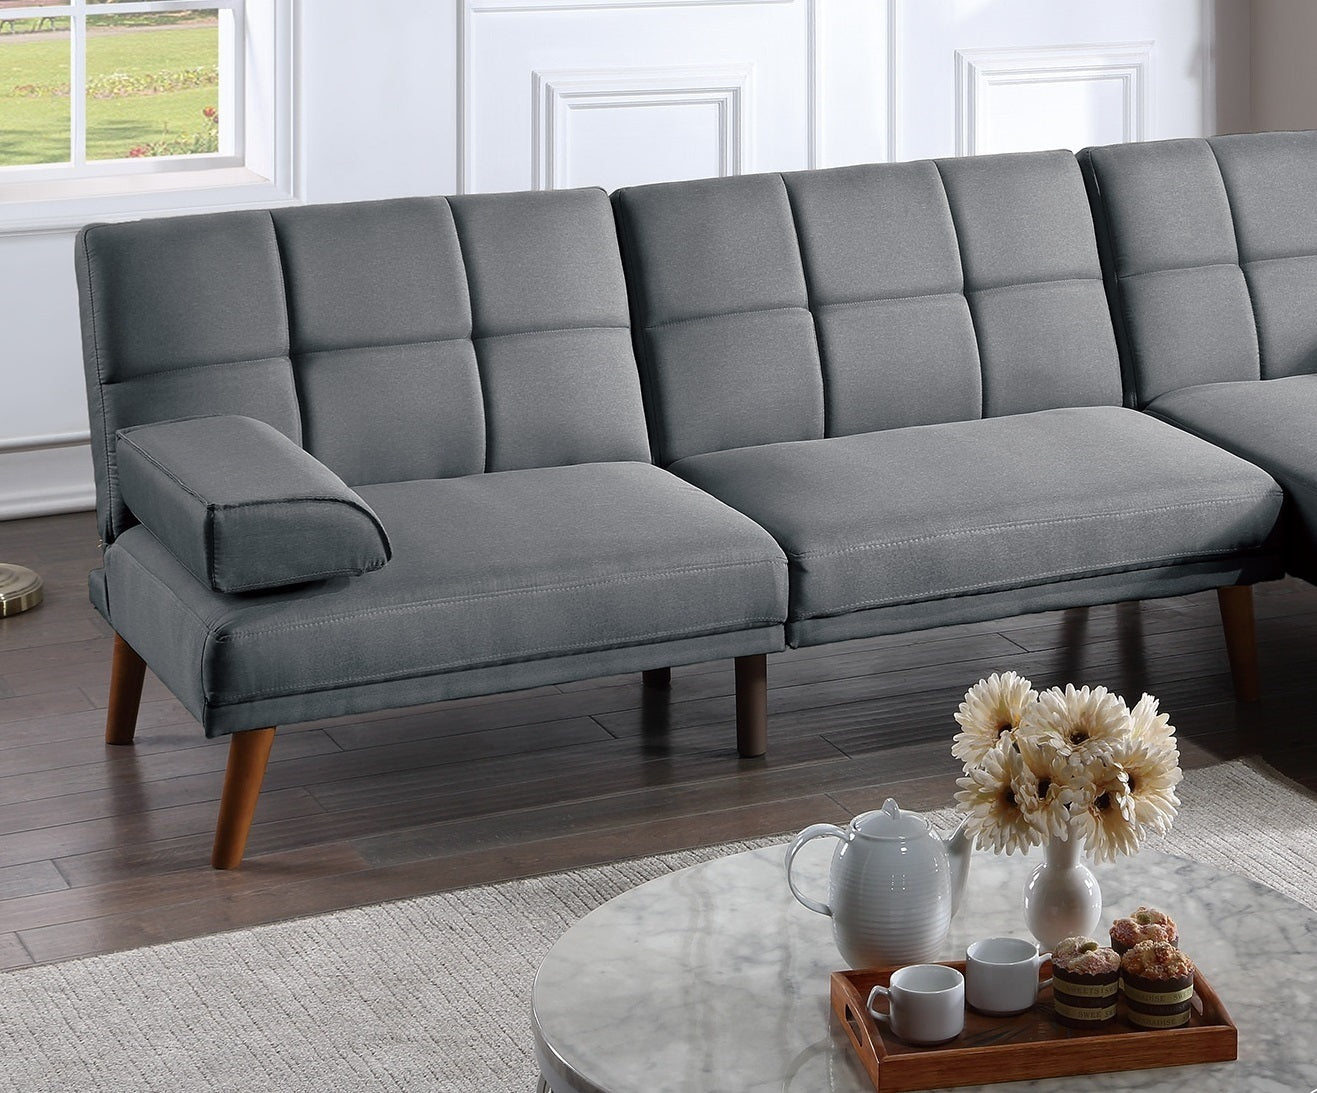 BASIT Collection Blue Grey Color Polyfiber Sectional Sofa Set Living Room Furniture Solid wood Legs Tufted Couch Adjustable Sofa Chaise